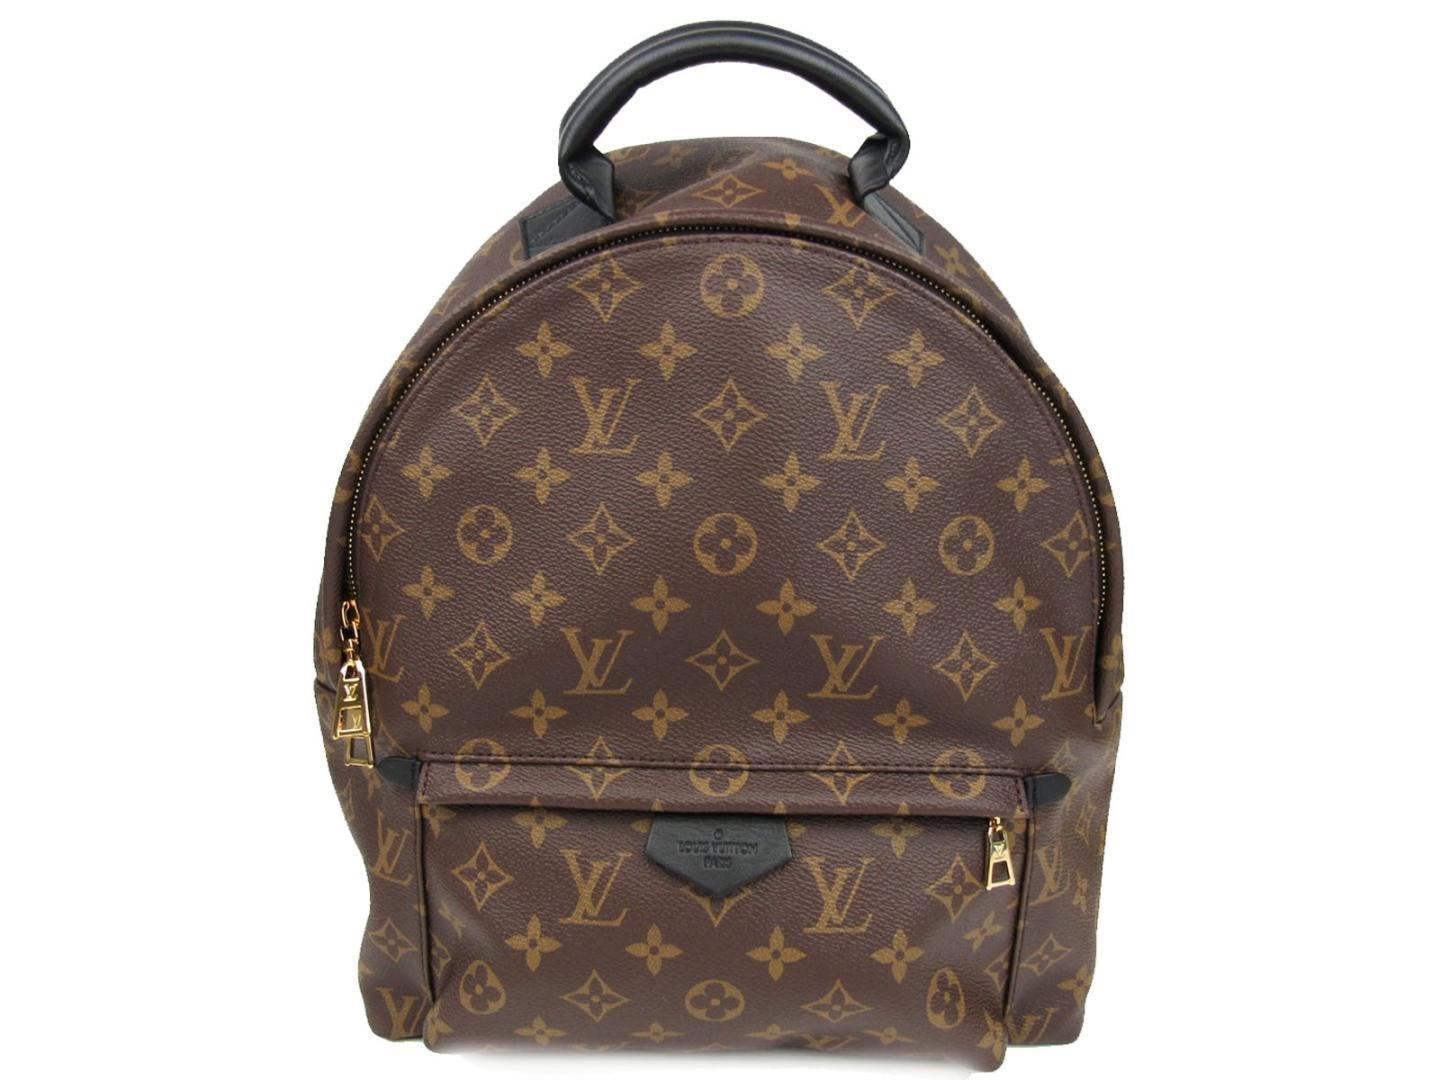 Louis Vuitton Palm Springs Backpack Mm Back Bag Monogram Canvas M41561 in Brown - Lyst